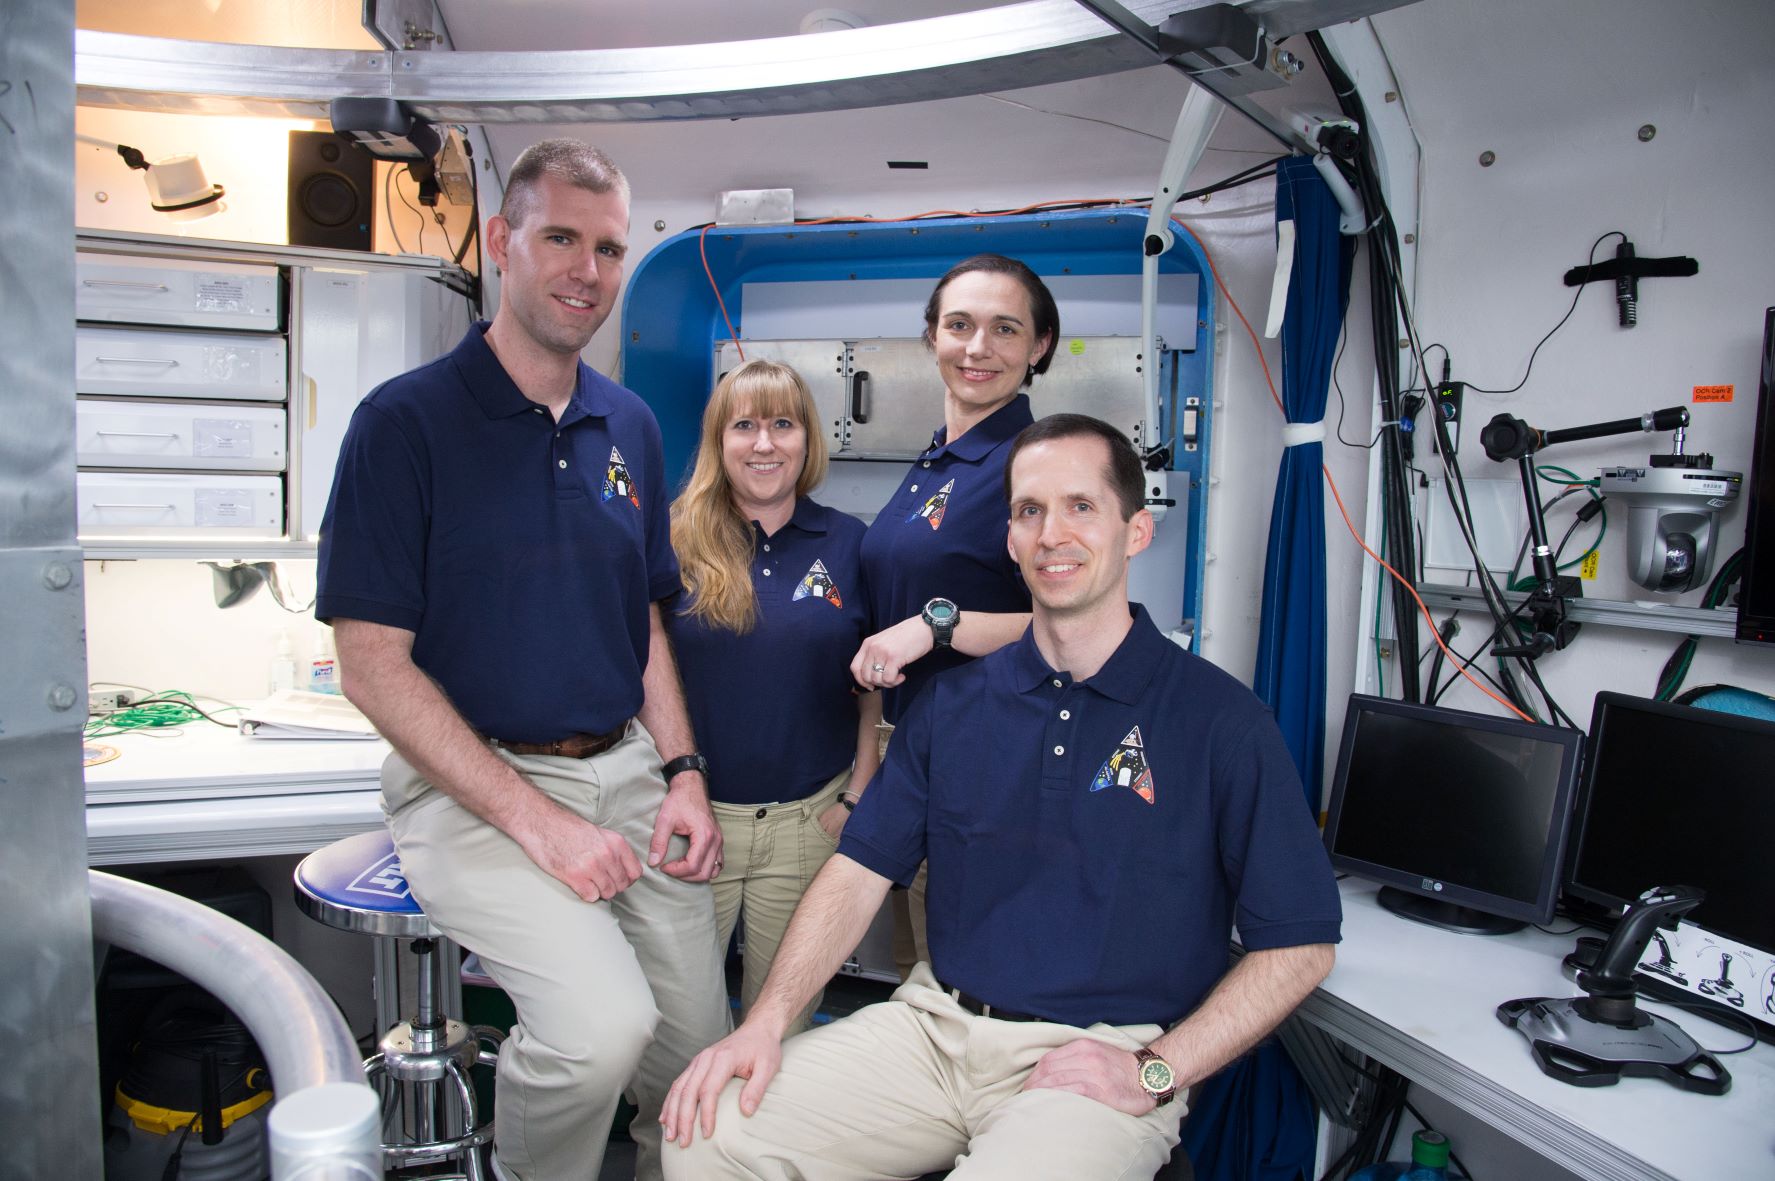 Andrzej Stewart (left) and his fellow crew members pose for a photo inside NASA's Human Exploration Research Analog, or HERA, in Houston. The crew lived and worked like astronauts during a two-week mission in 2015.